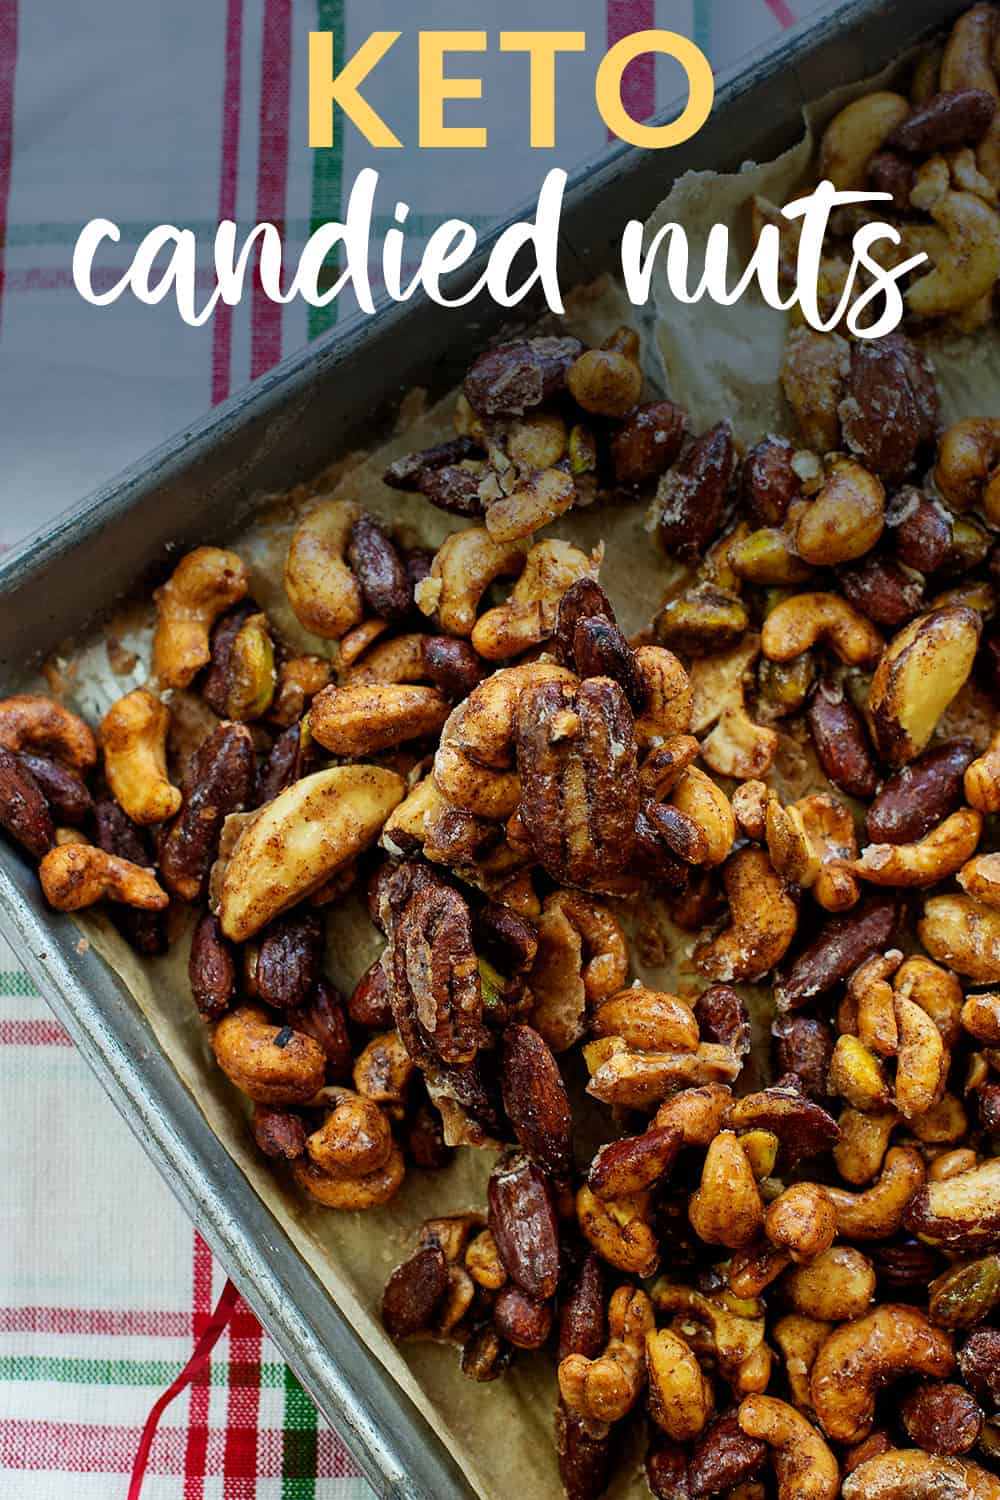 Low carb candied nuts on baking sheet with text for Pinterest.